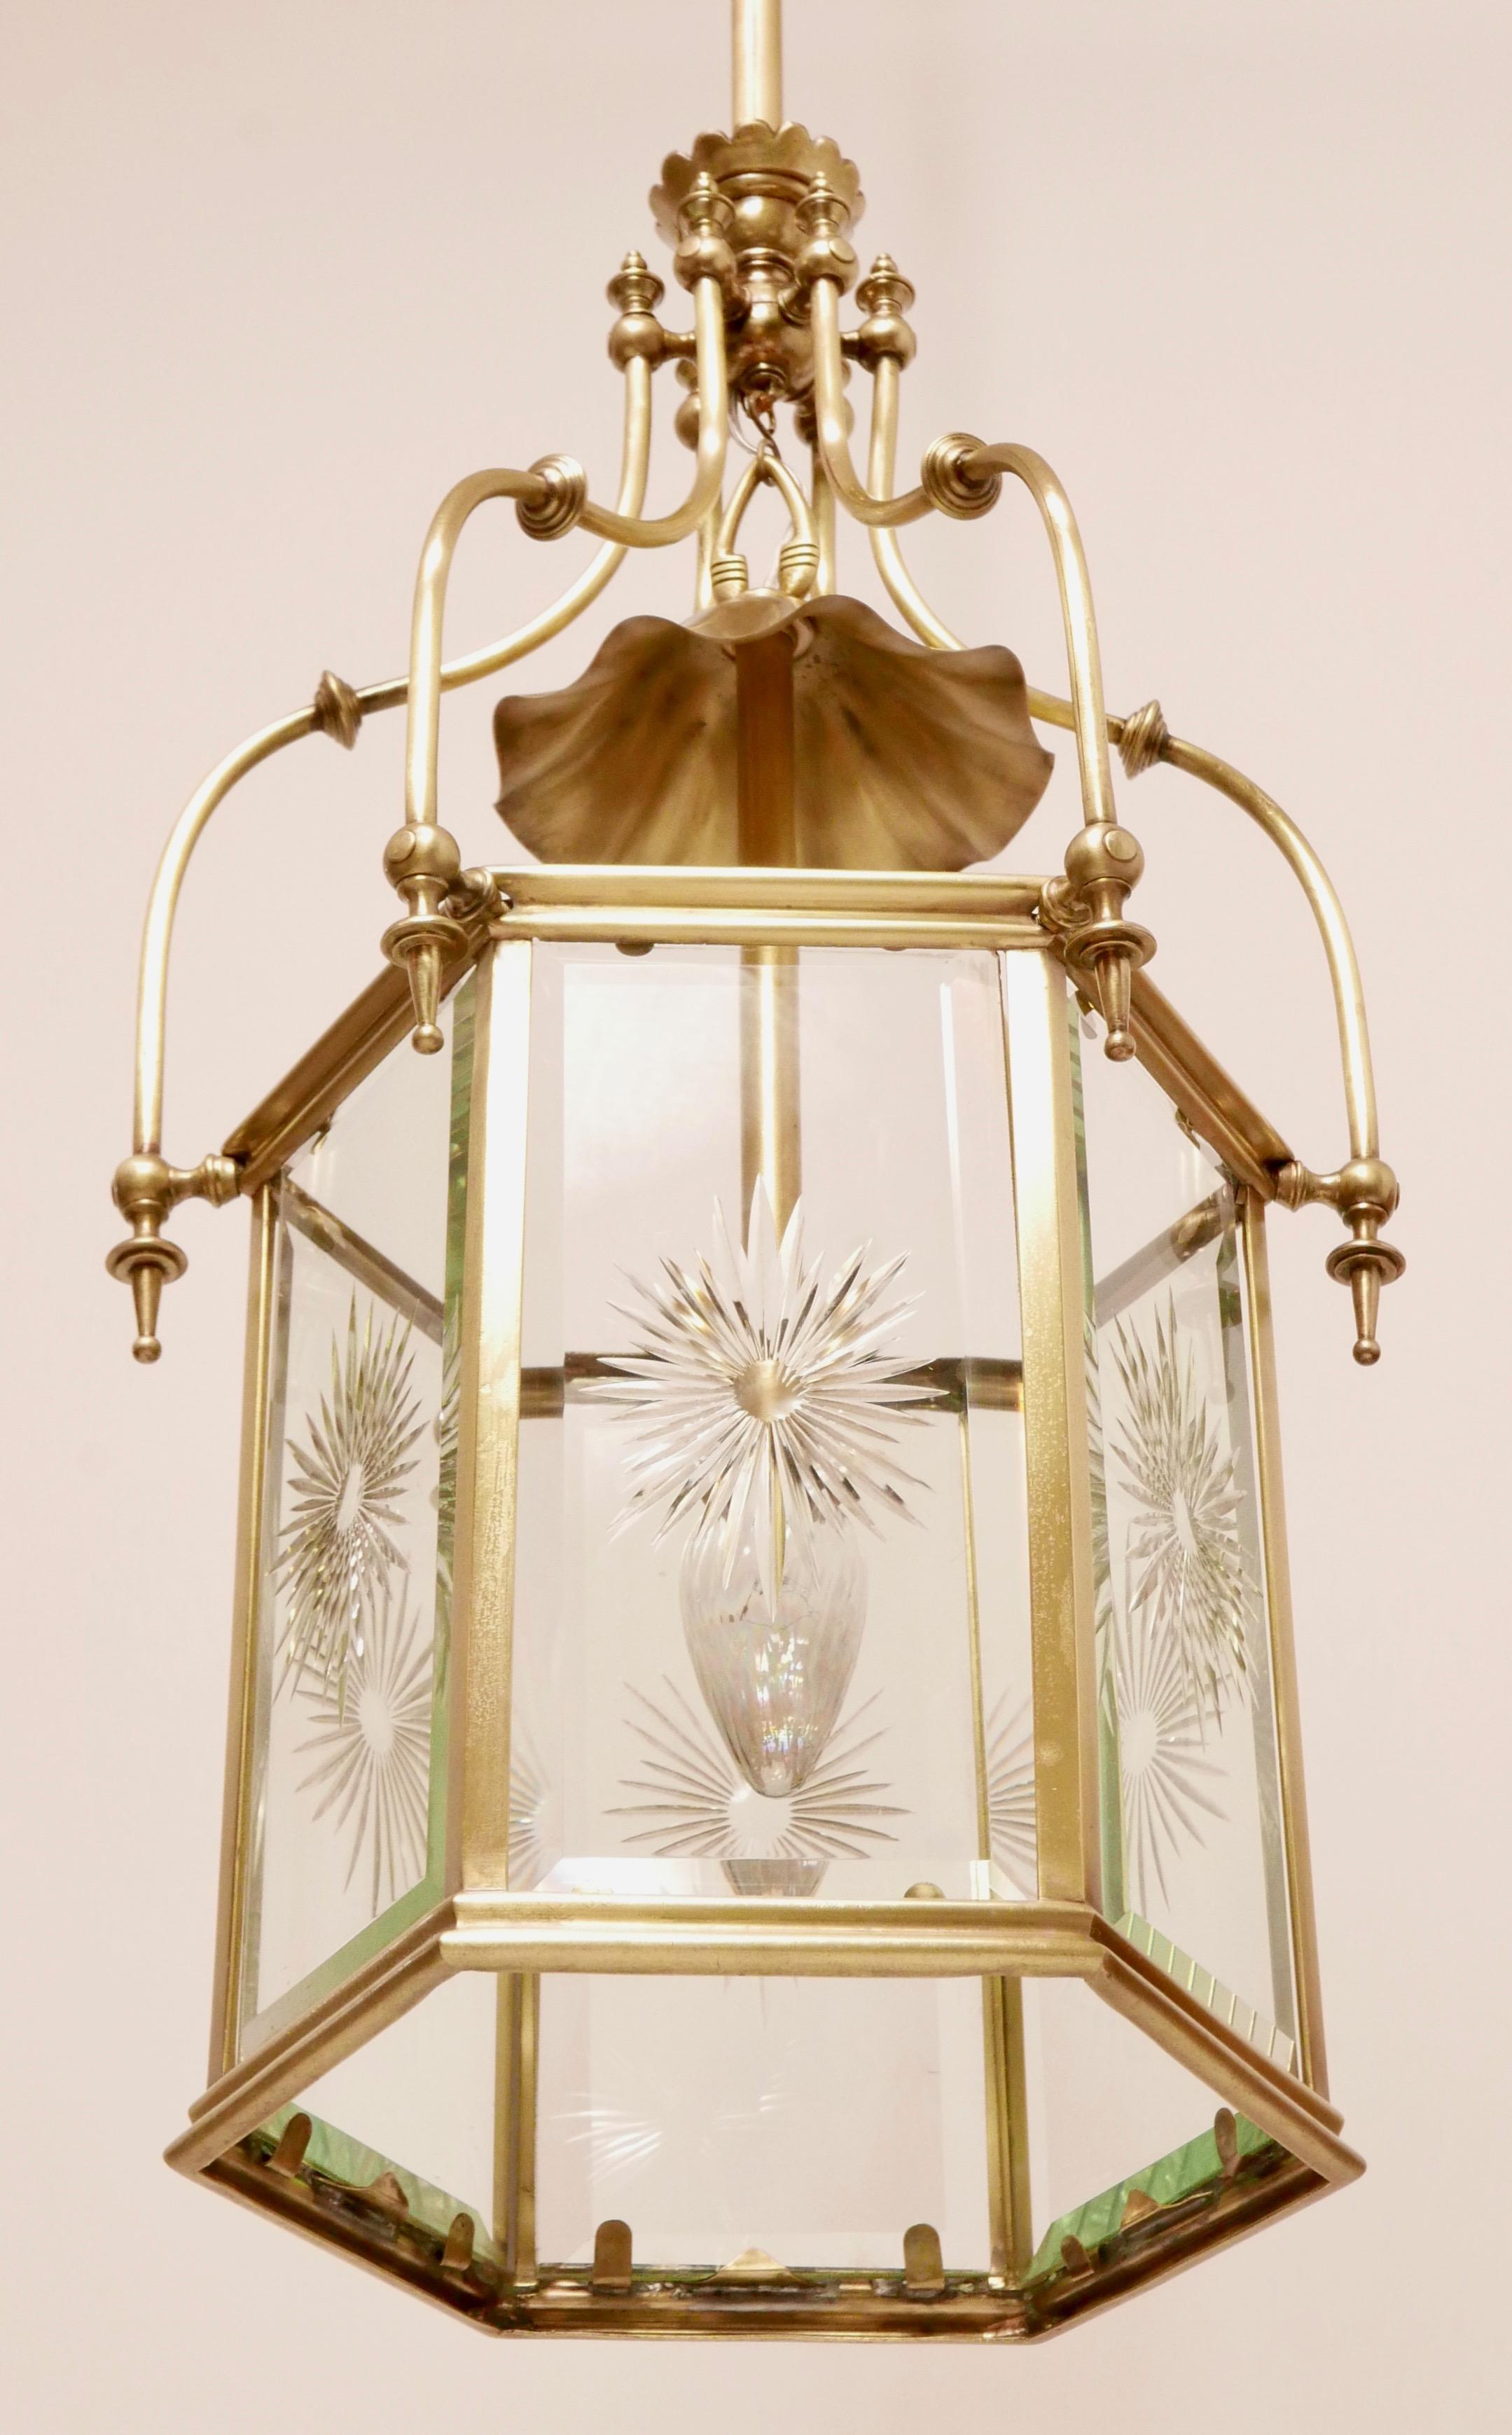 Exceptional 19th Century Brass & Cut Glass Hexagon Shaped Entry or Hall Lantern For Sale 6